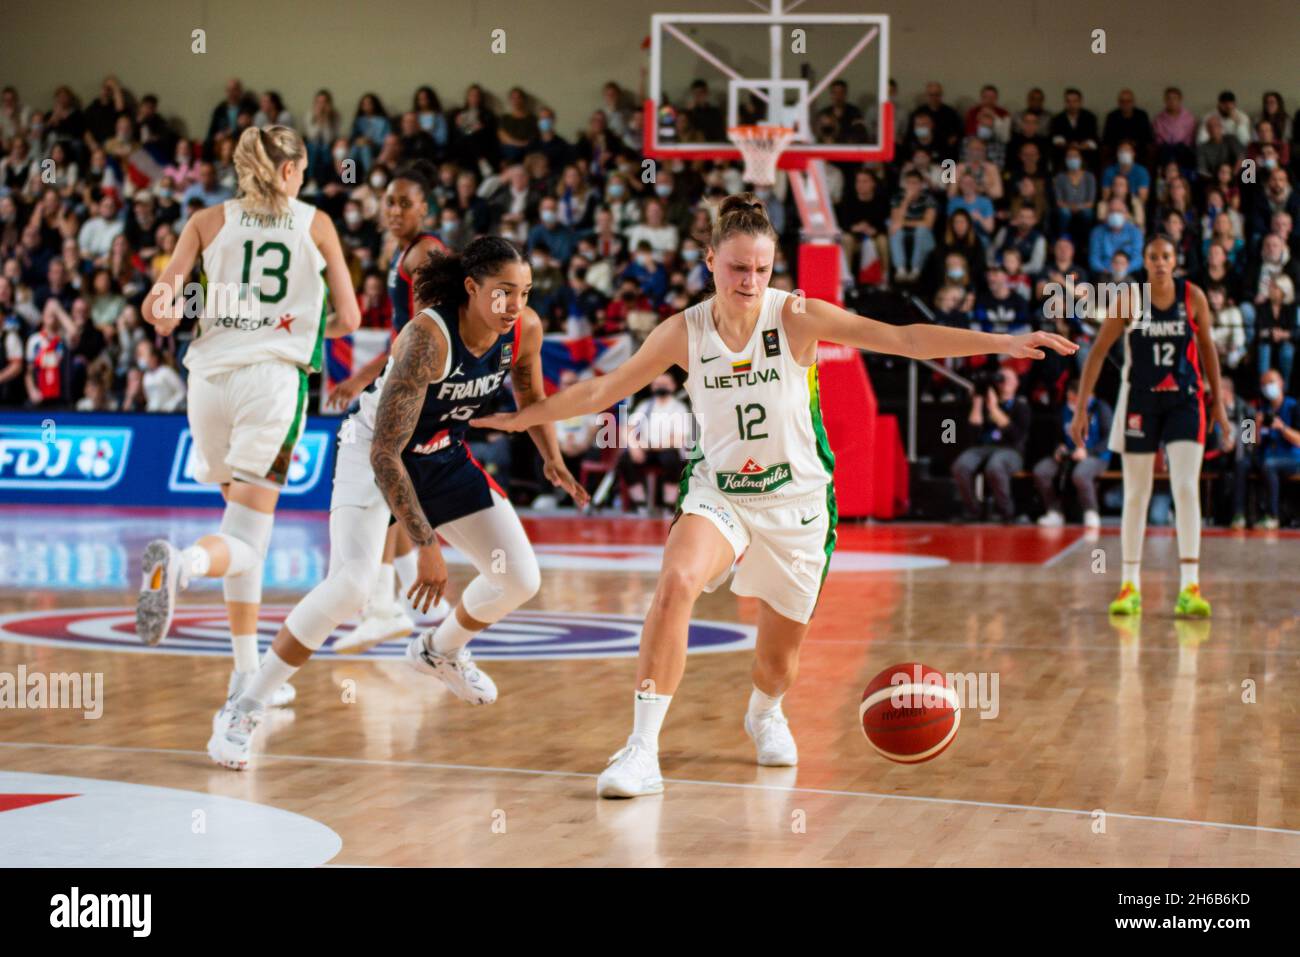 Villeneuve-d'Ascq, France. Nov 14 2021: Gabby Williams of France and Laura Juskaite of Lithuania fight for the ball during the FIBA Women's EuroBasket 2023, Qualifiers Group B Basketball match between France and Lithuania on November 14, 2021 at Palacium in Villeneuve-d'Ascq, France - Photo: Antoine Massinon/DPPI/LiveMedia Credit: Independent Photo Agency/Alamy Live News Stock Photo